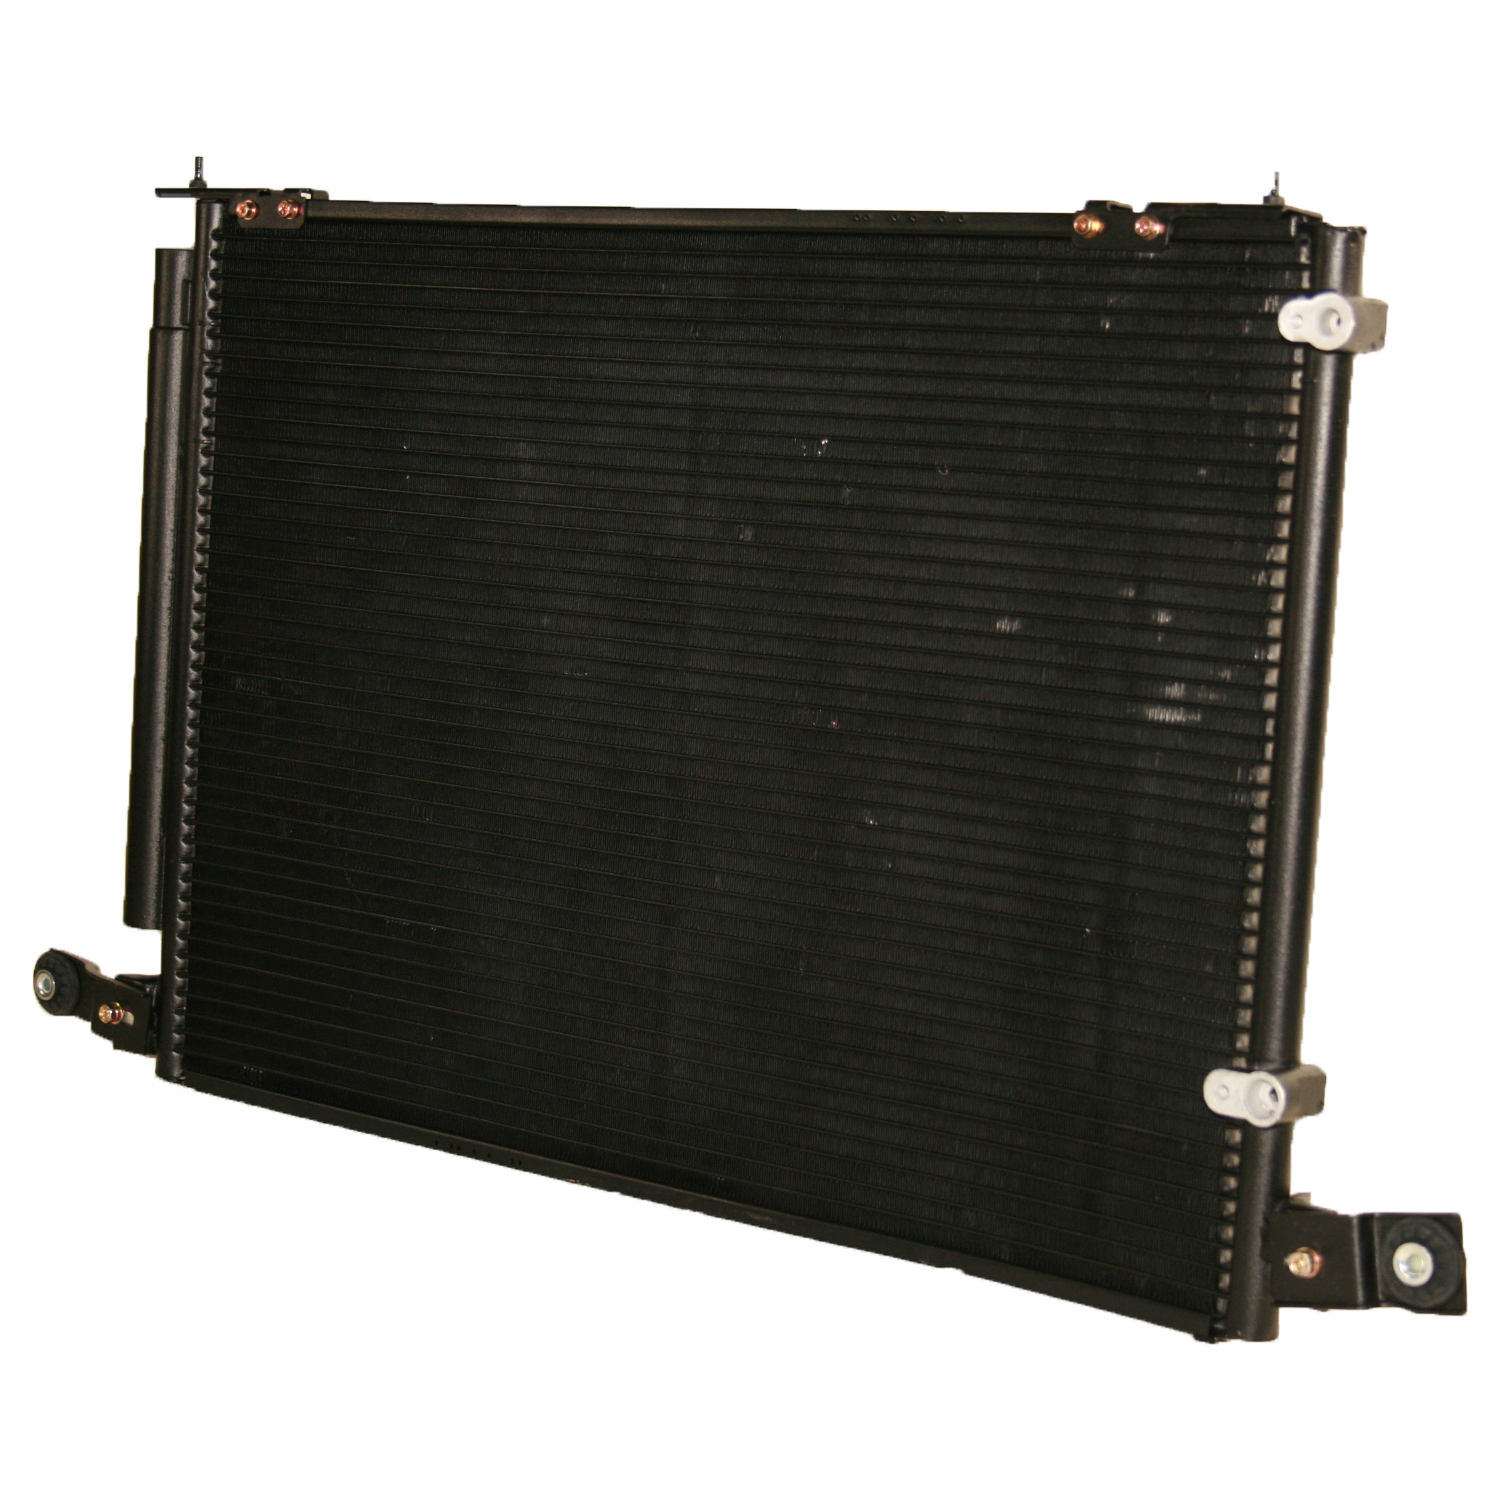 TCW Condenser 44-3081 New Product Image field_60b6a13a6e67c